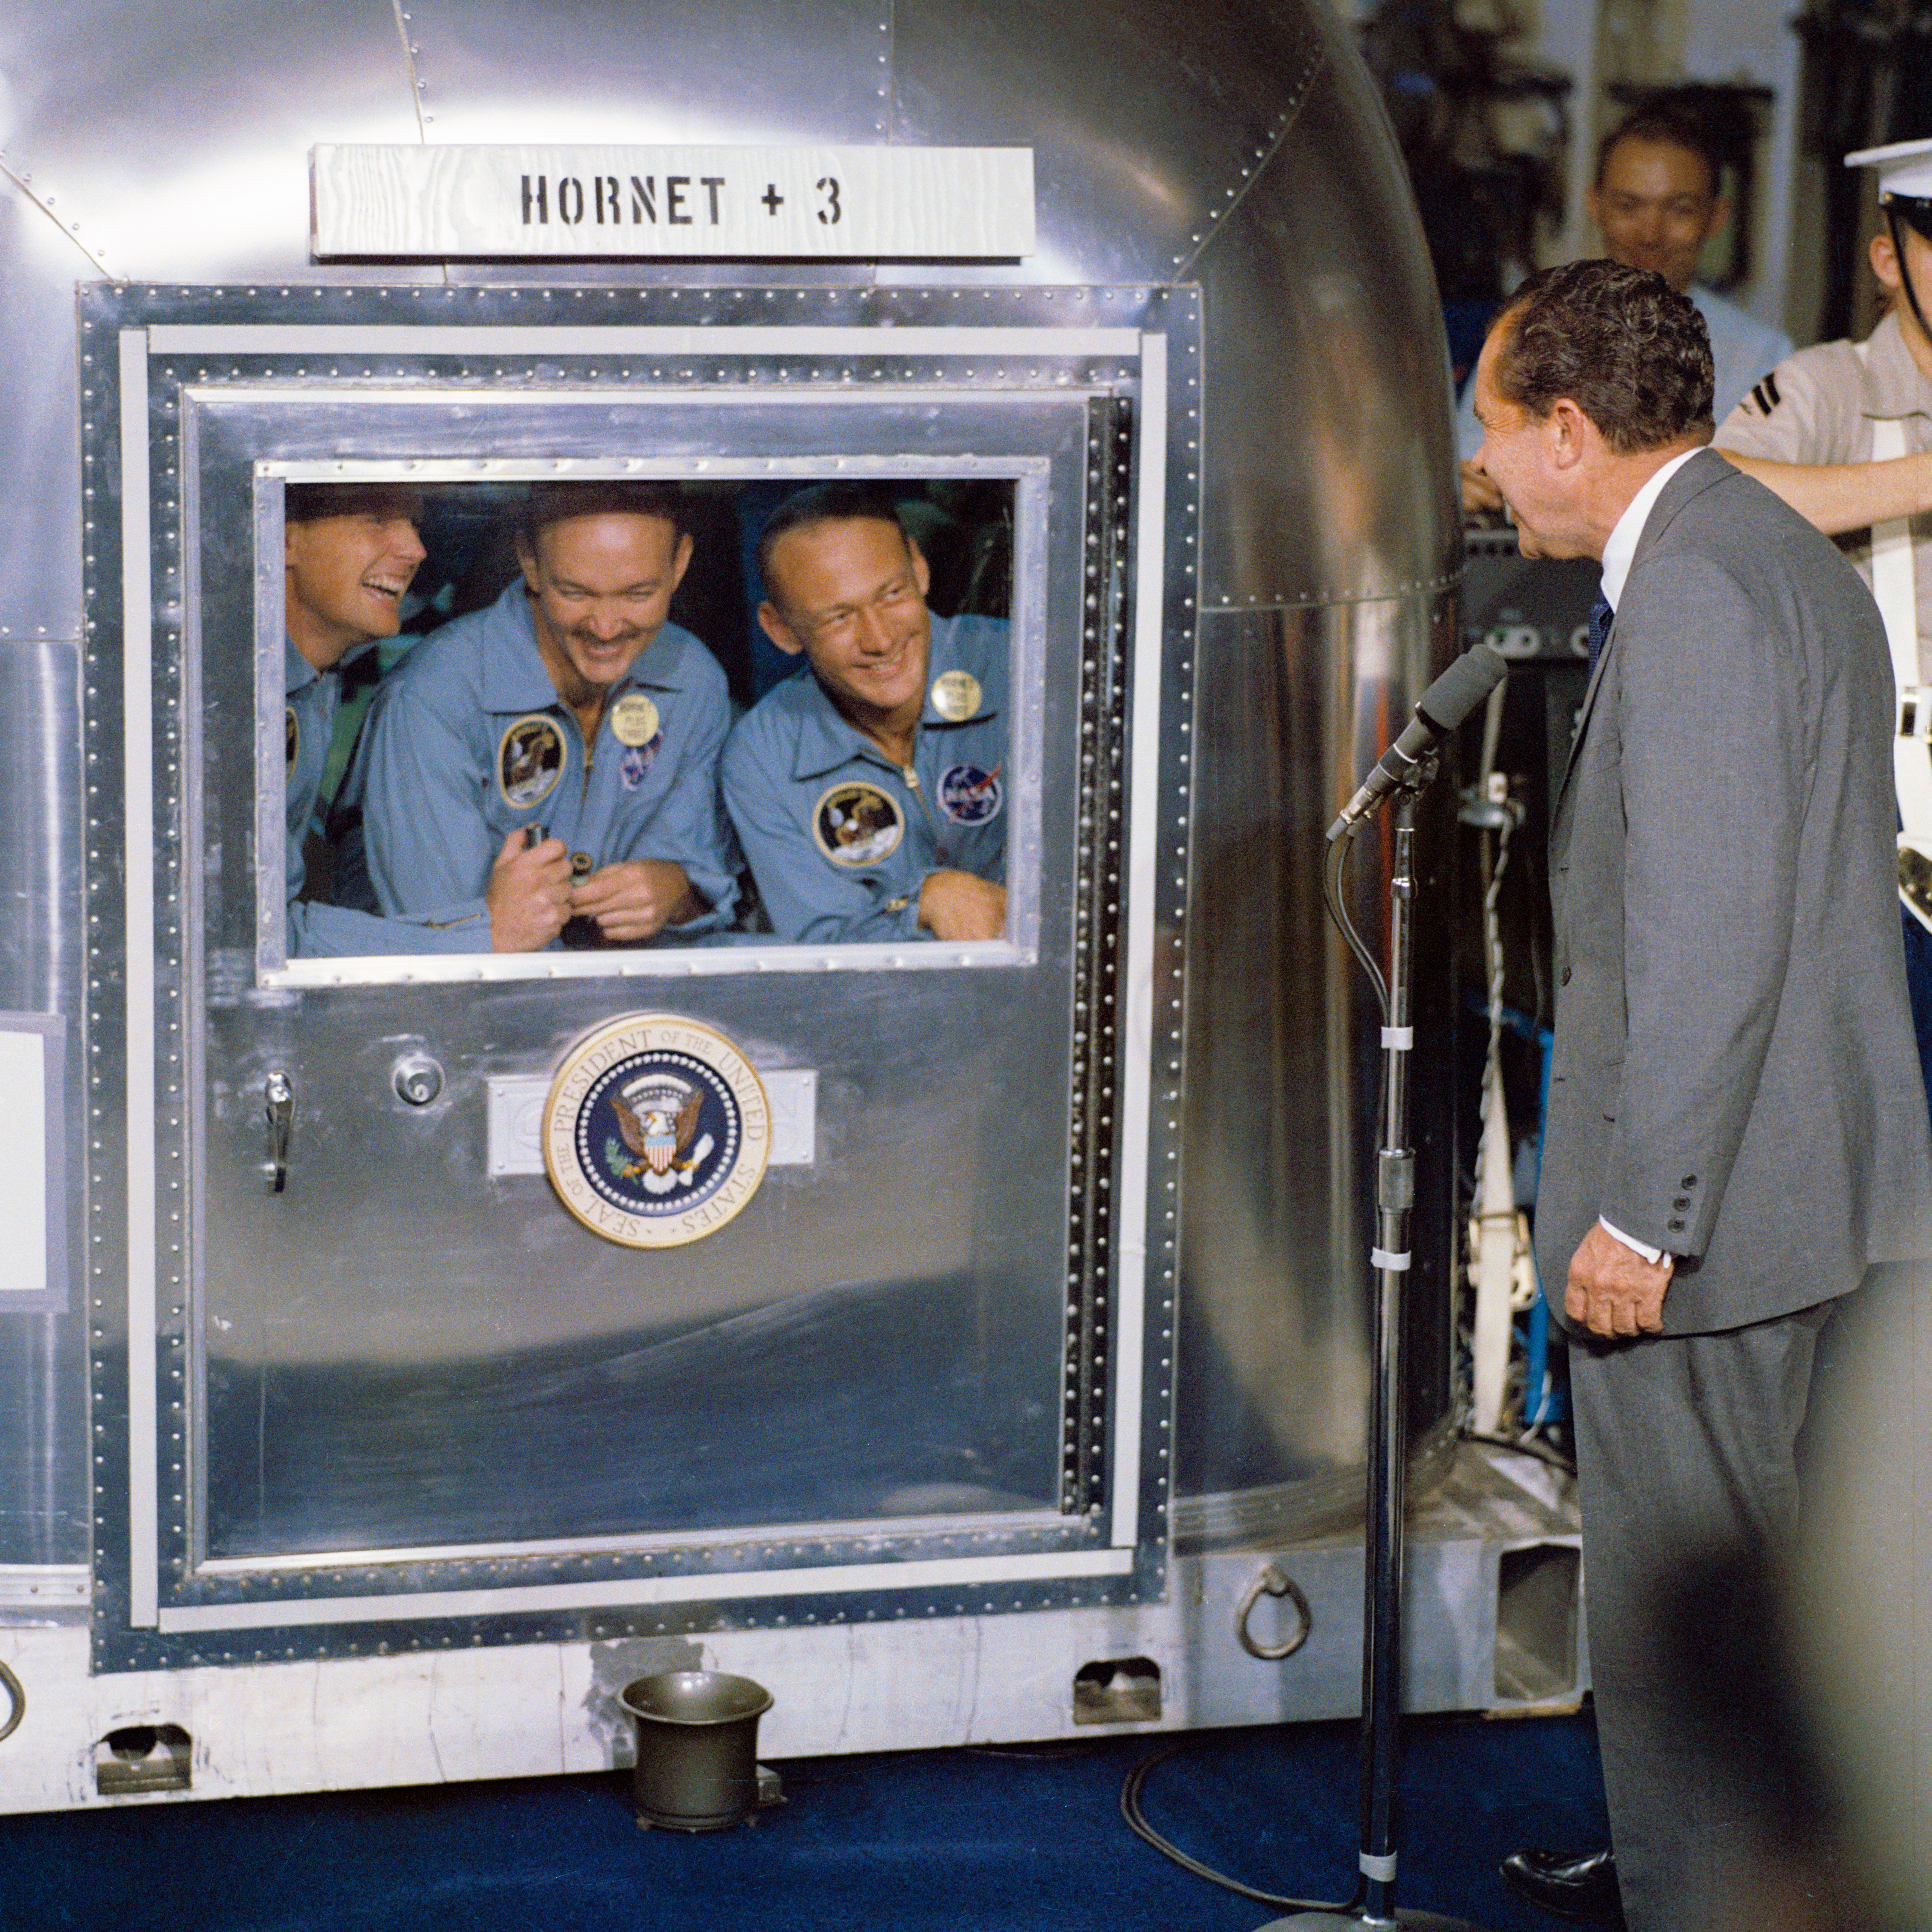 Changed from their BIGs into flight suits, Mike, Neil, and Buzz chat with President Nixon through the MQF’s window